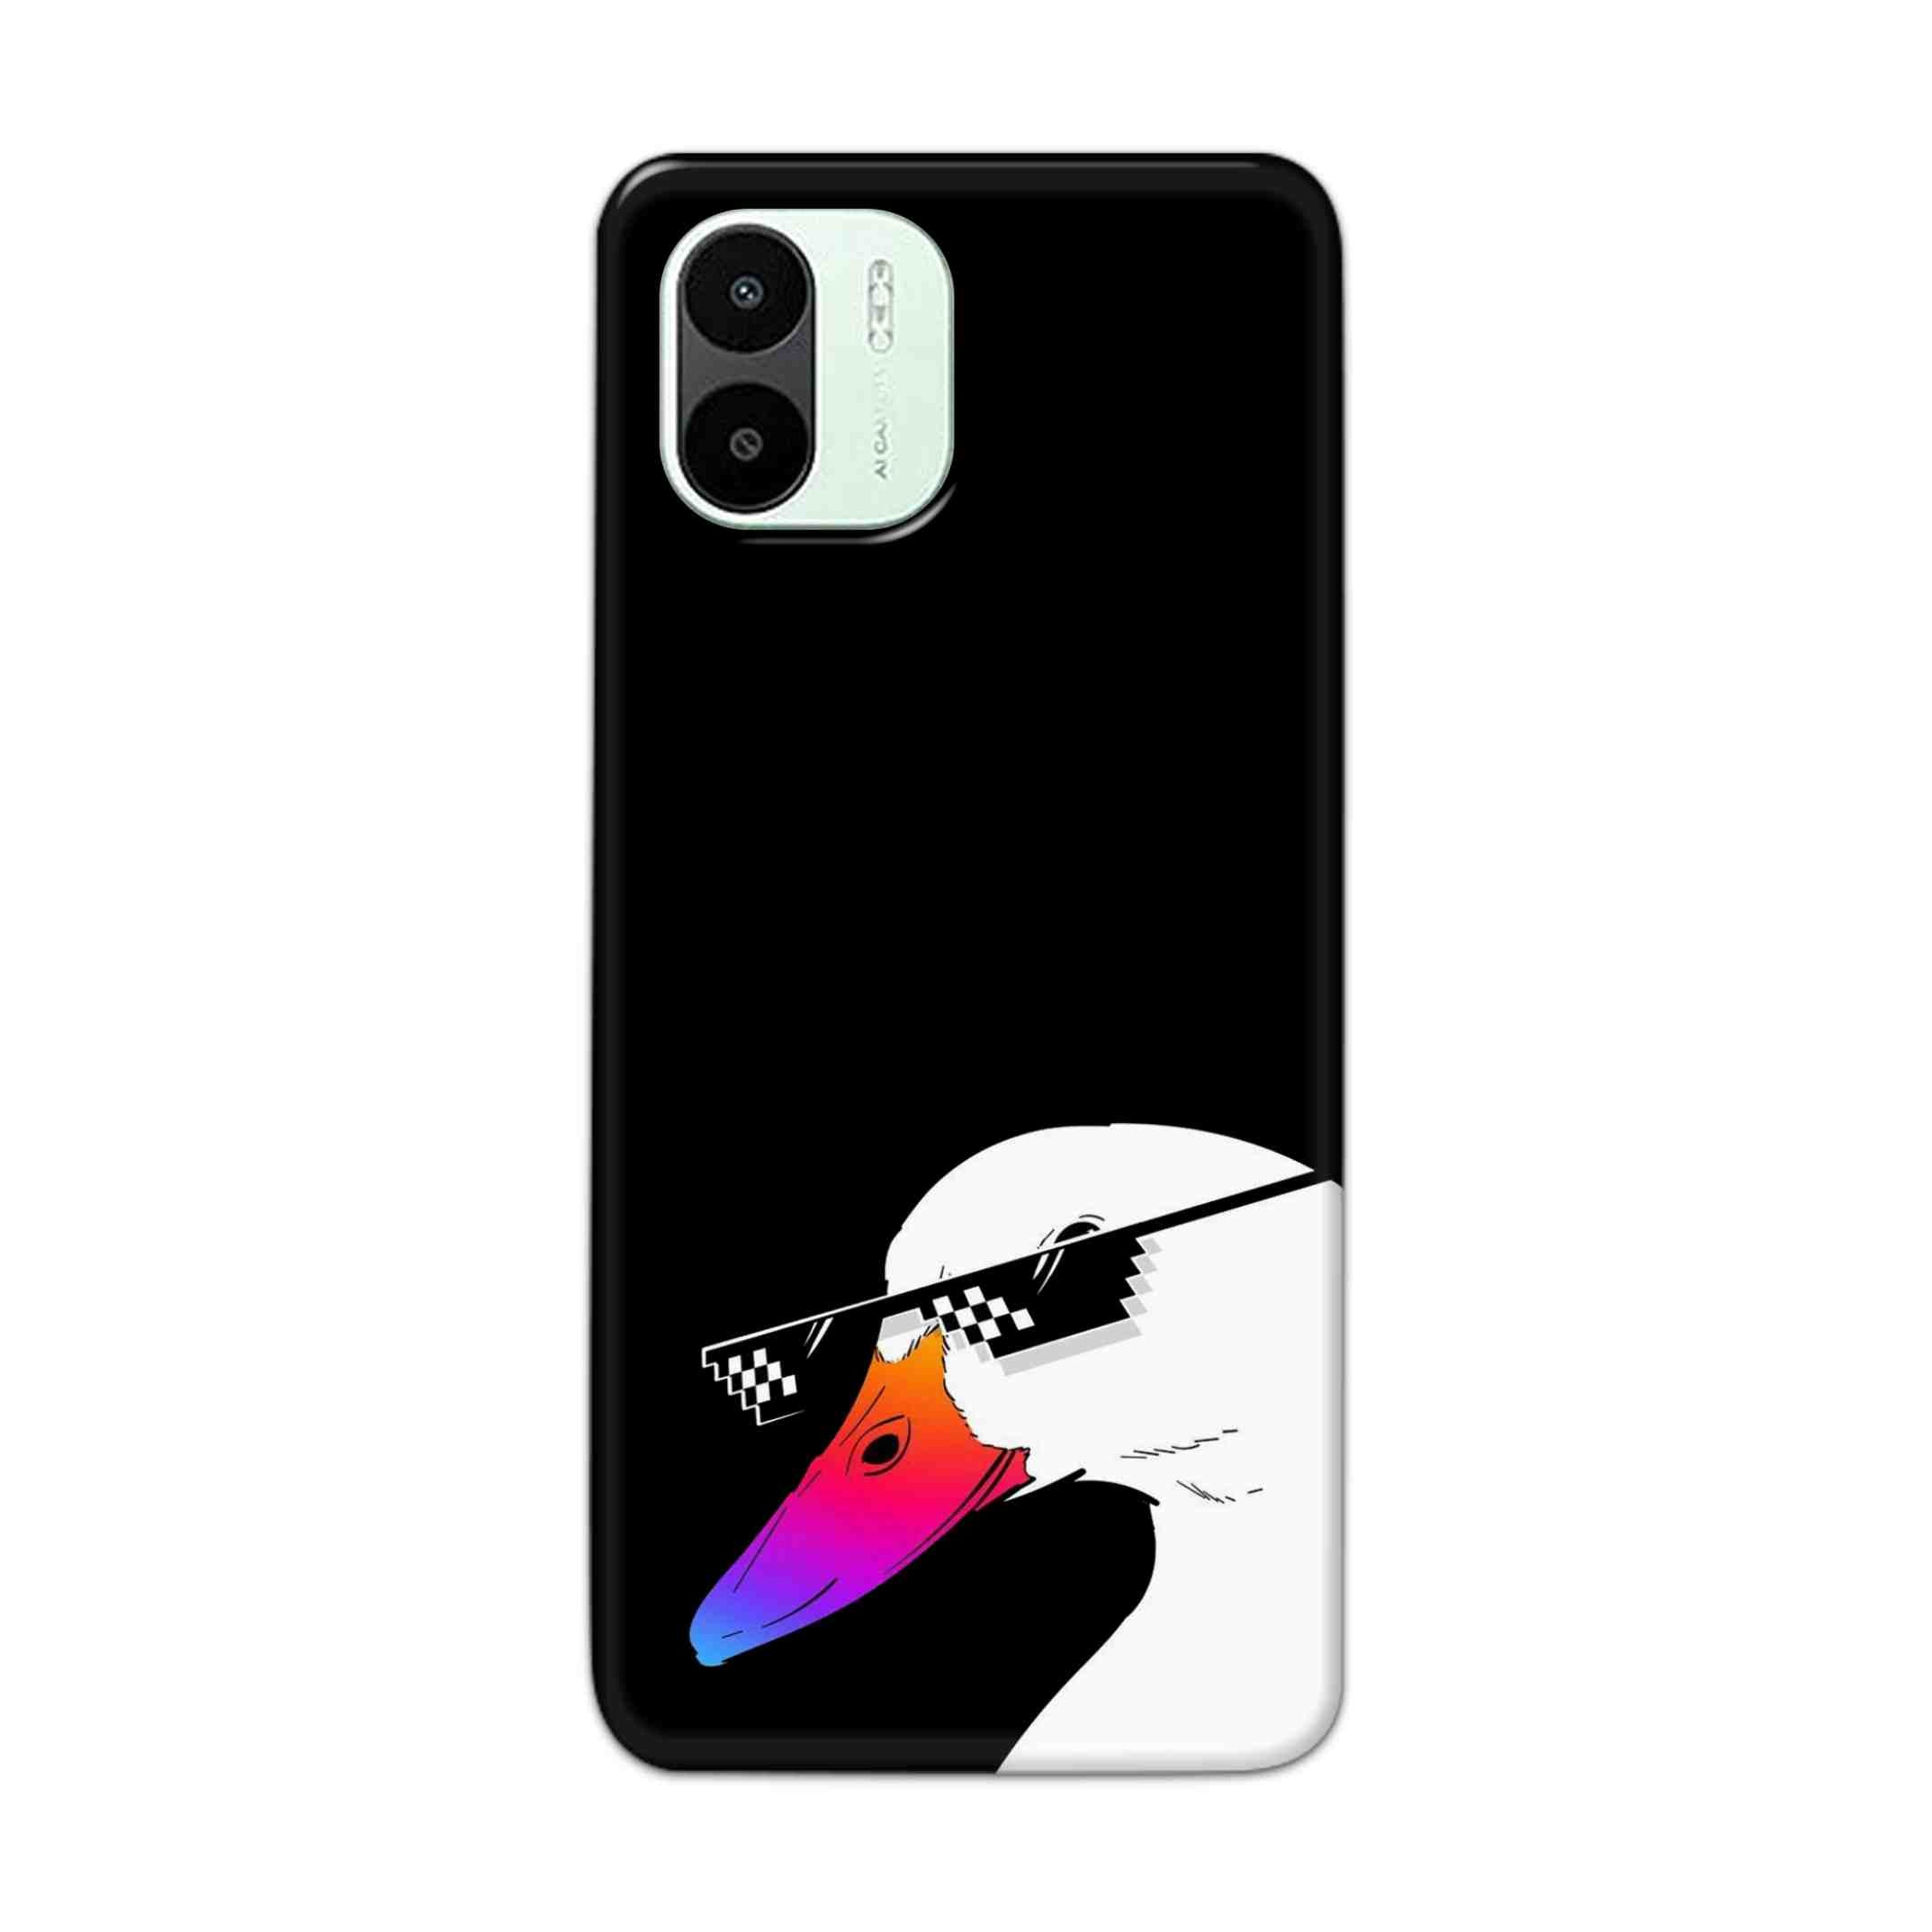 Buy Neon Duck Hard Back Mobile Phone Case Cover For Xiaomi Redmi A1 5G Online